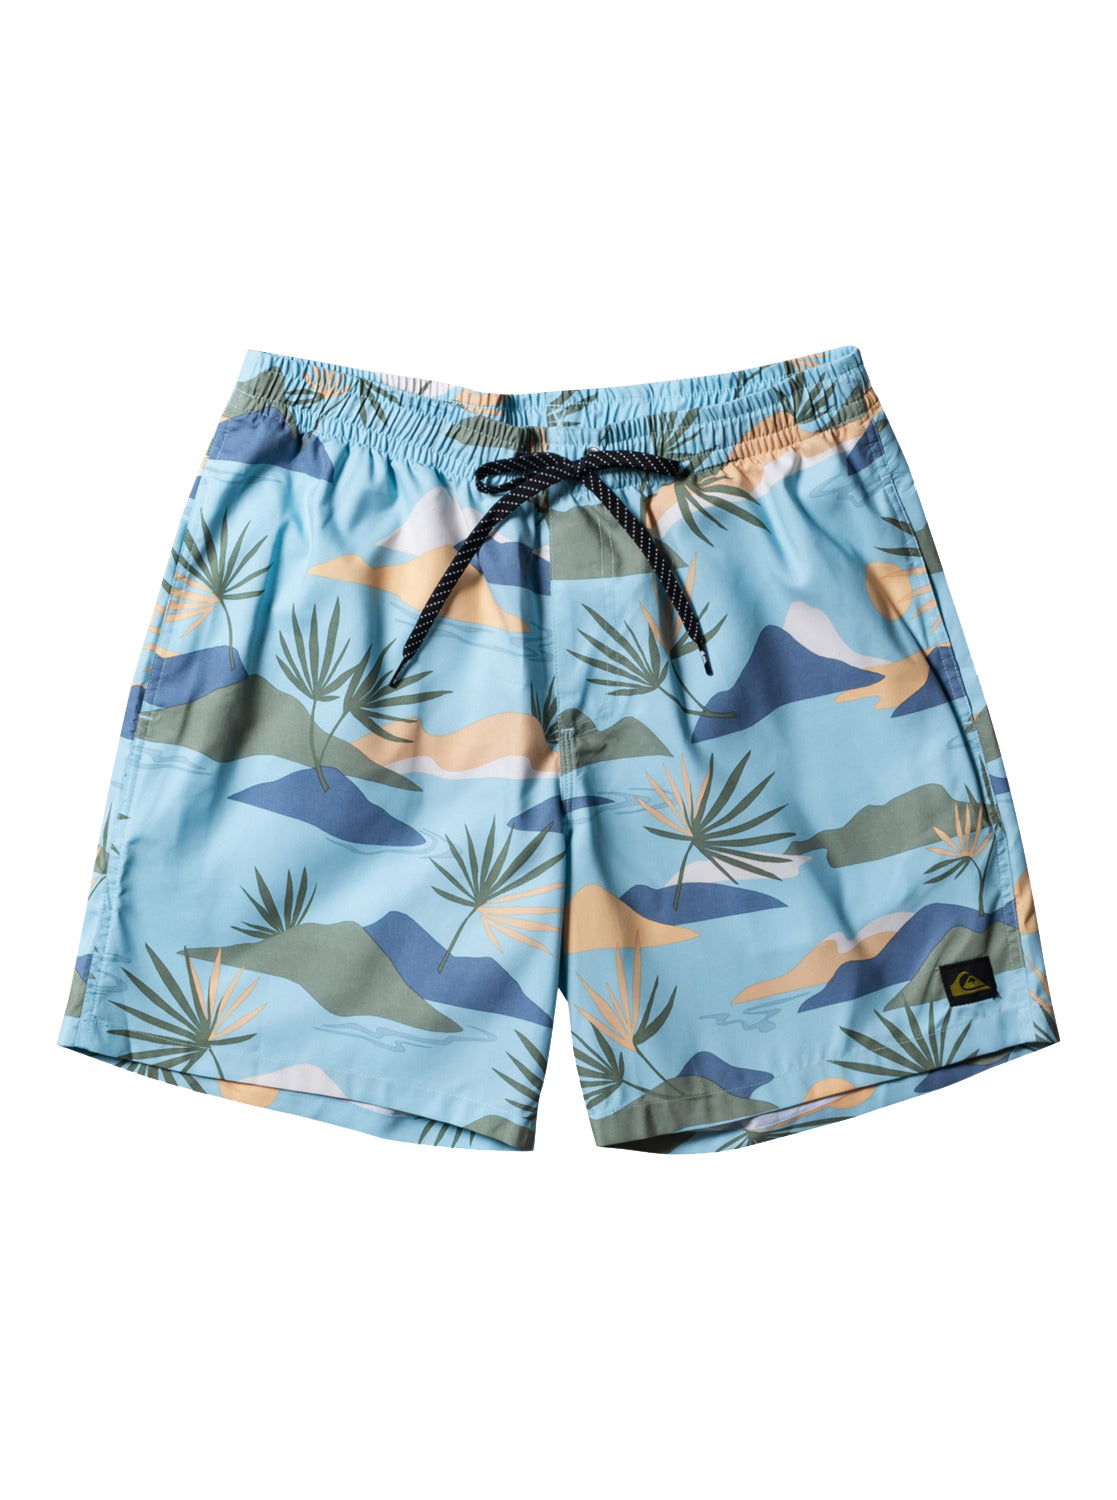 Quiksilver Everyday Jam Mixed Volley 17" Shorts BGC7 L